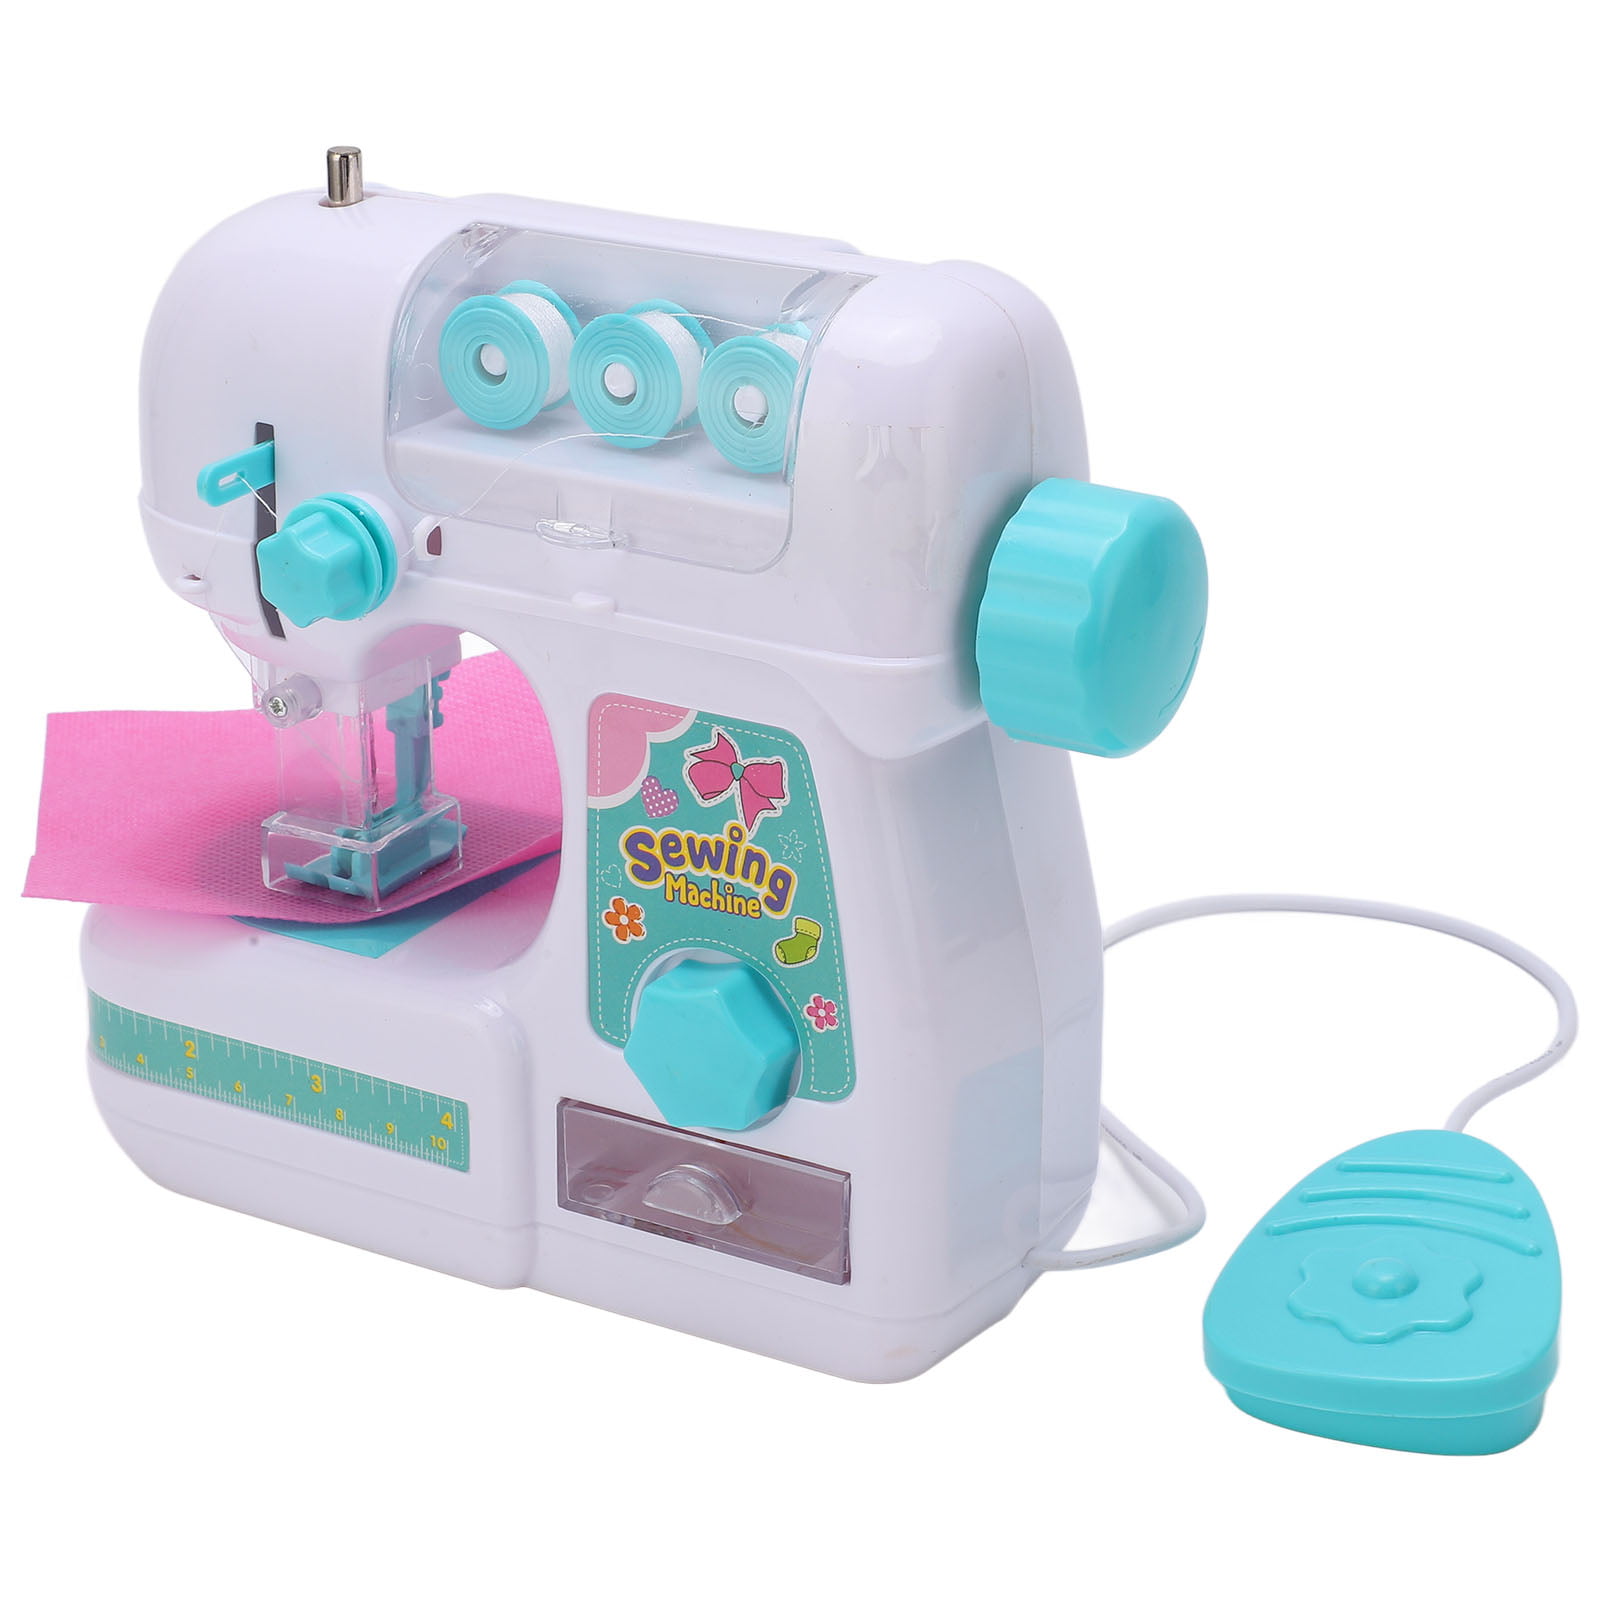 Mini Kids Simulation Electric Sewing Machine Small Appliances Kids  Educational Toys For Children Gift - Housekeeping Toys - AliExpress